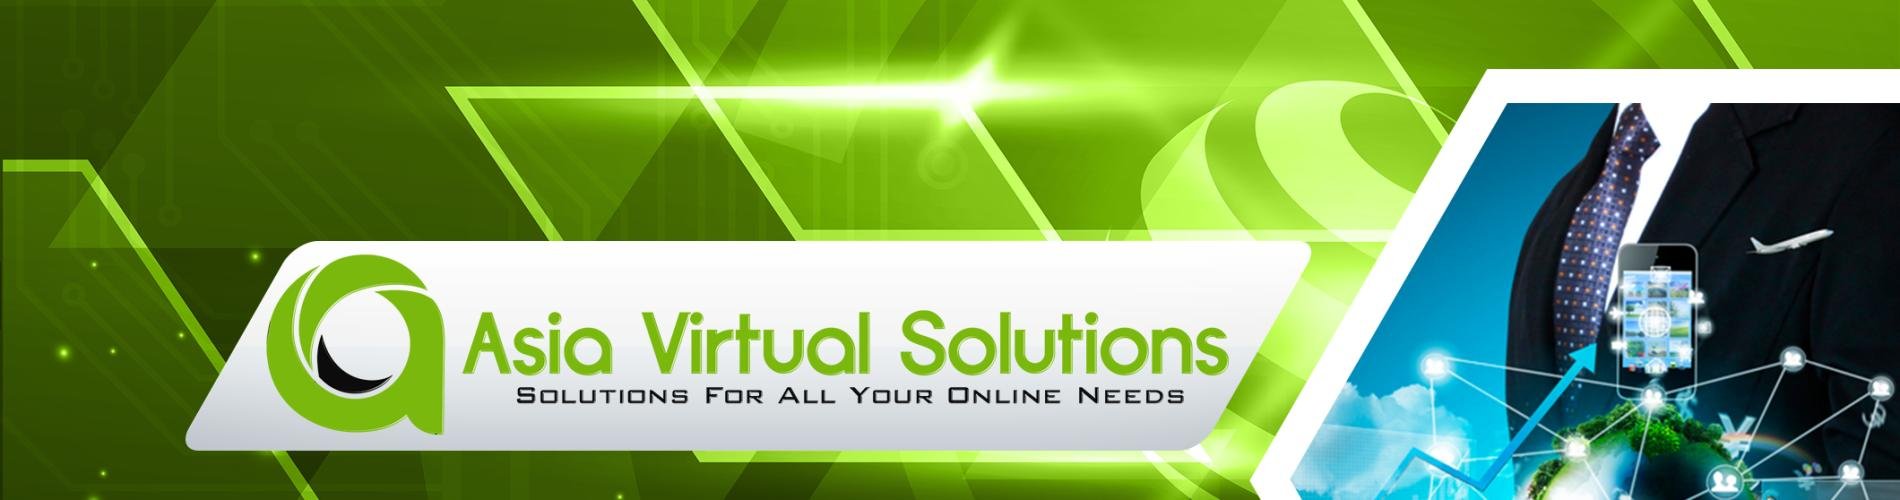 Asia Virtual Solutions cover